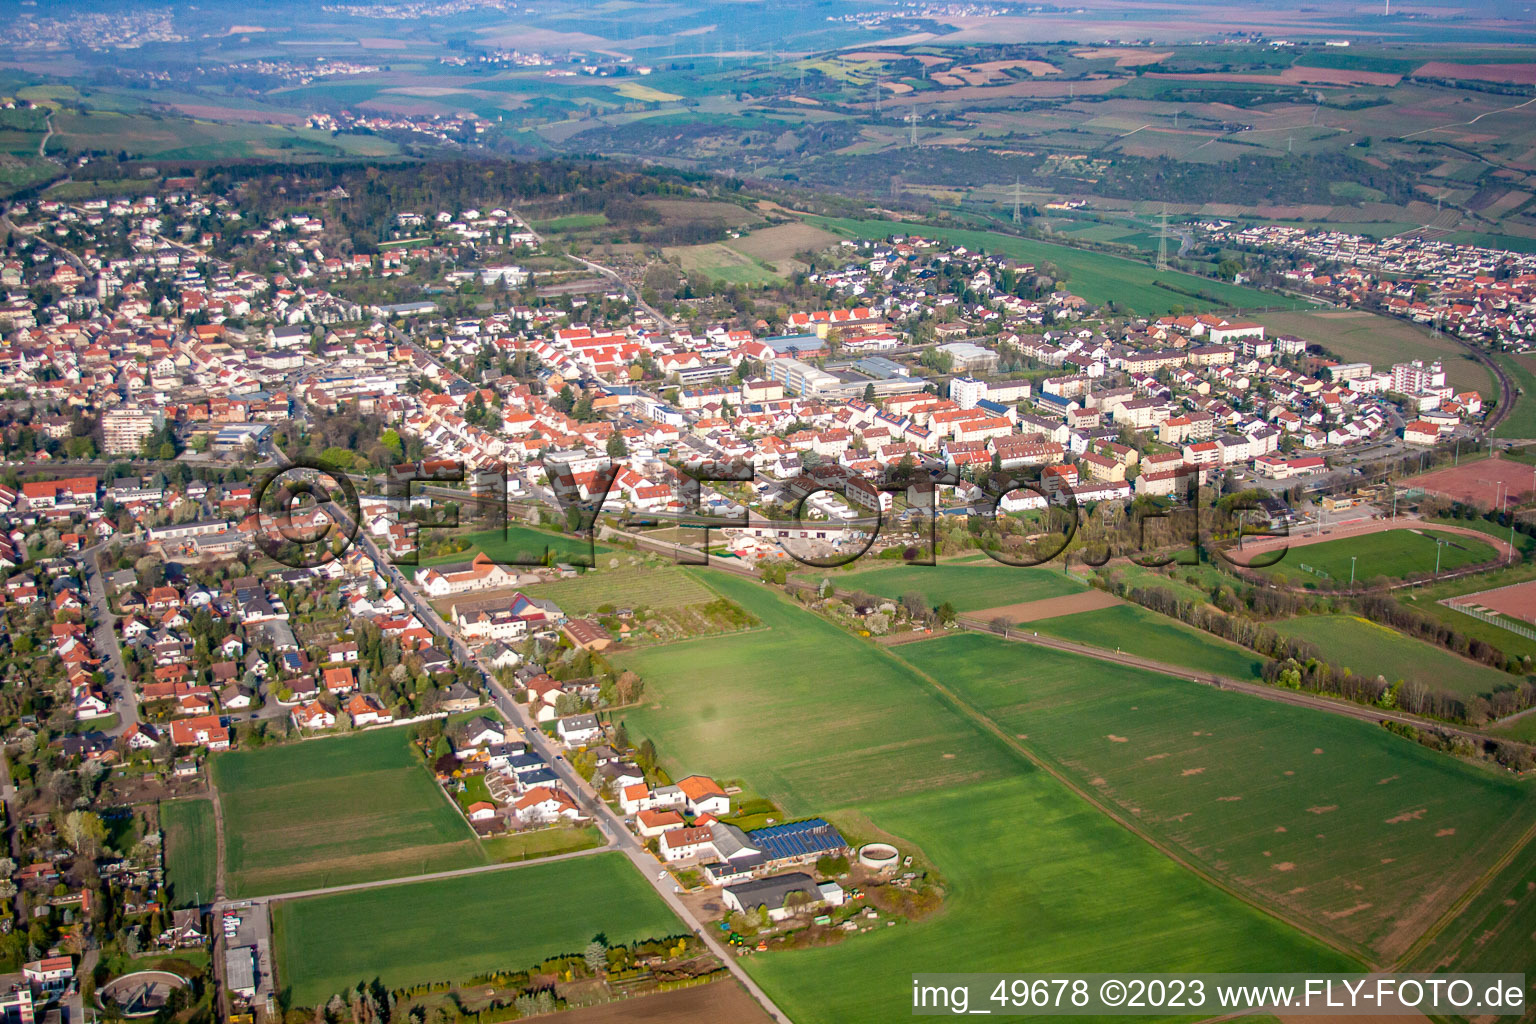 North in Grünstadt in the state Rhineland-Palatinate, Germany